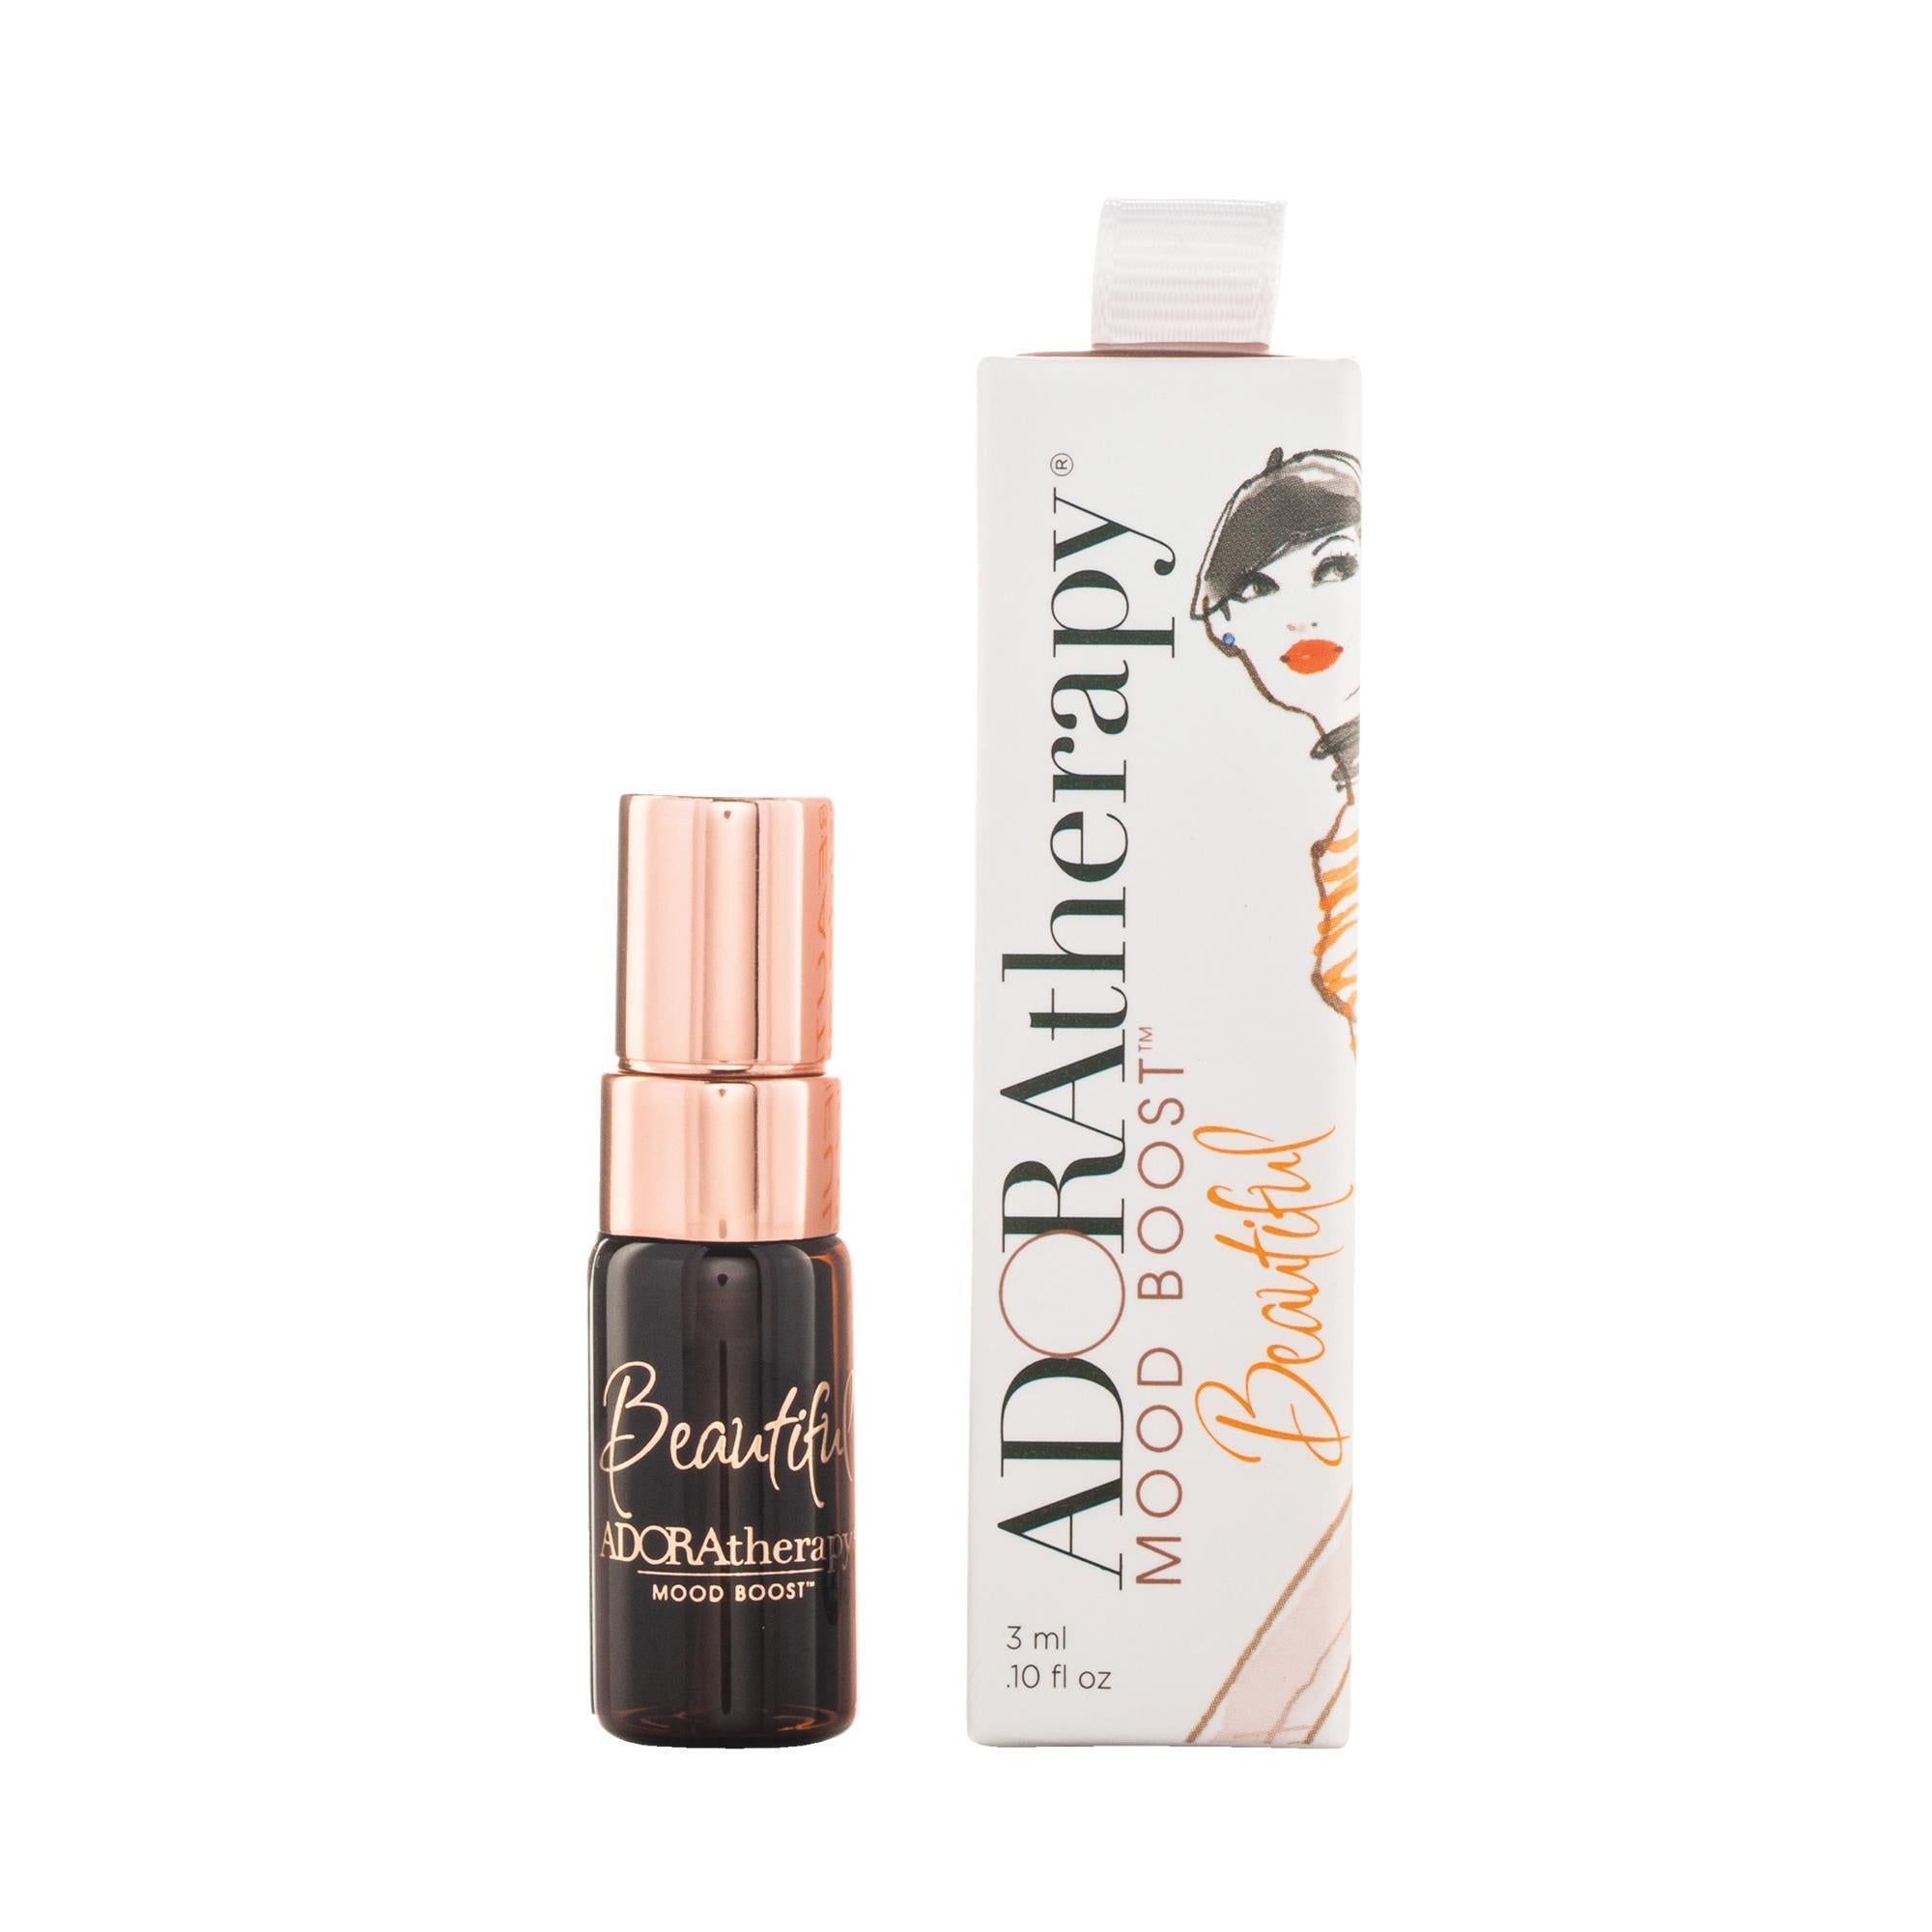 Fragrance 3 ml ADORAtherapy Beautiful Gal on the Go Mood Boost